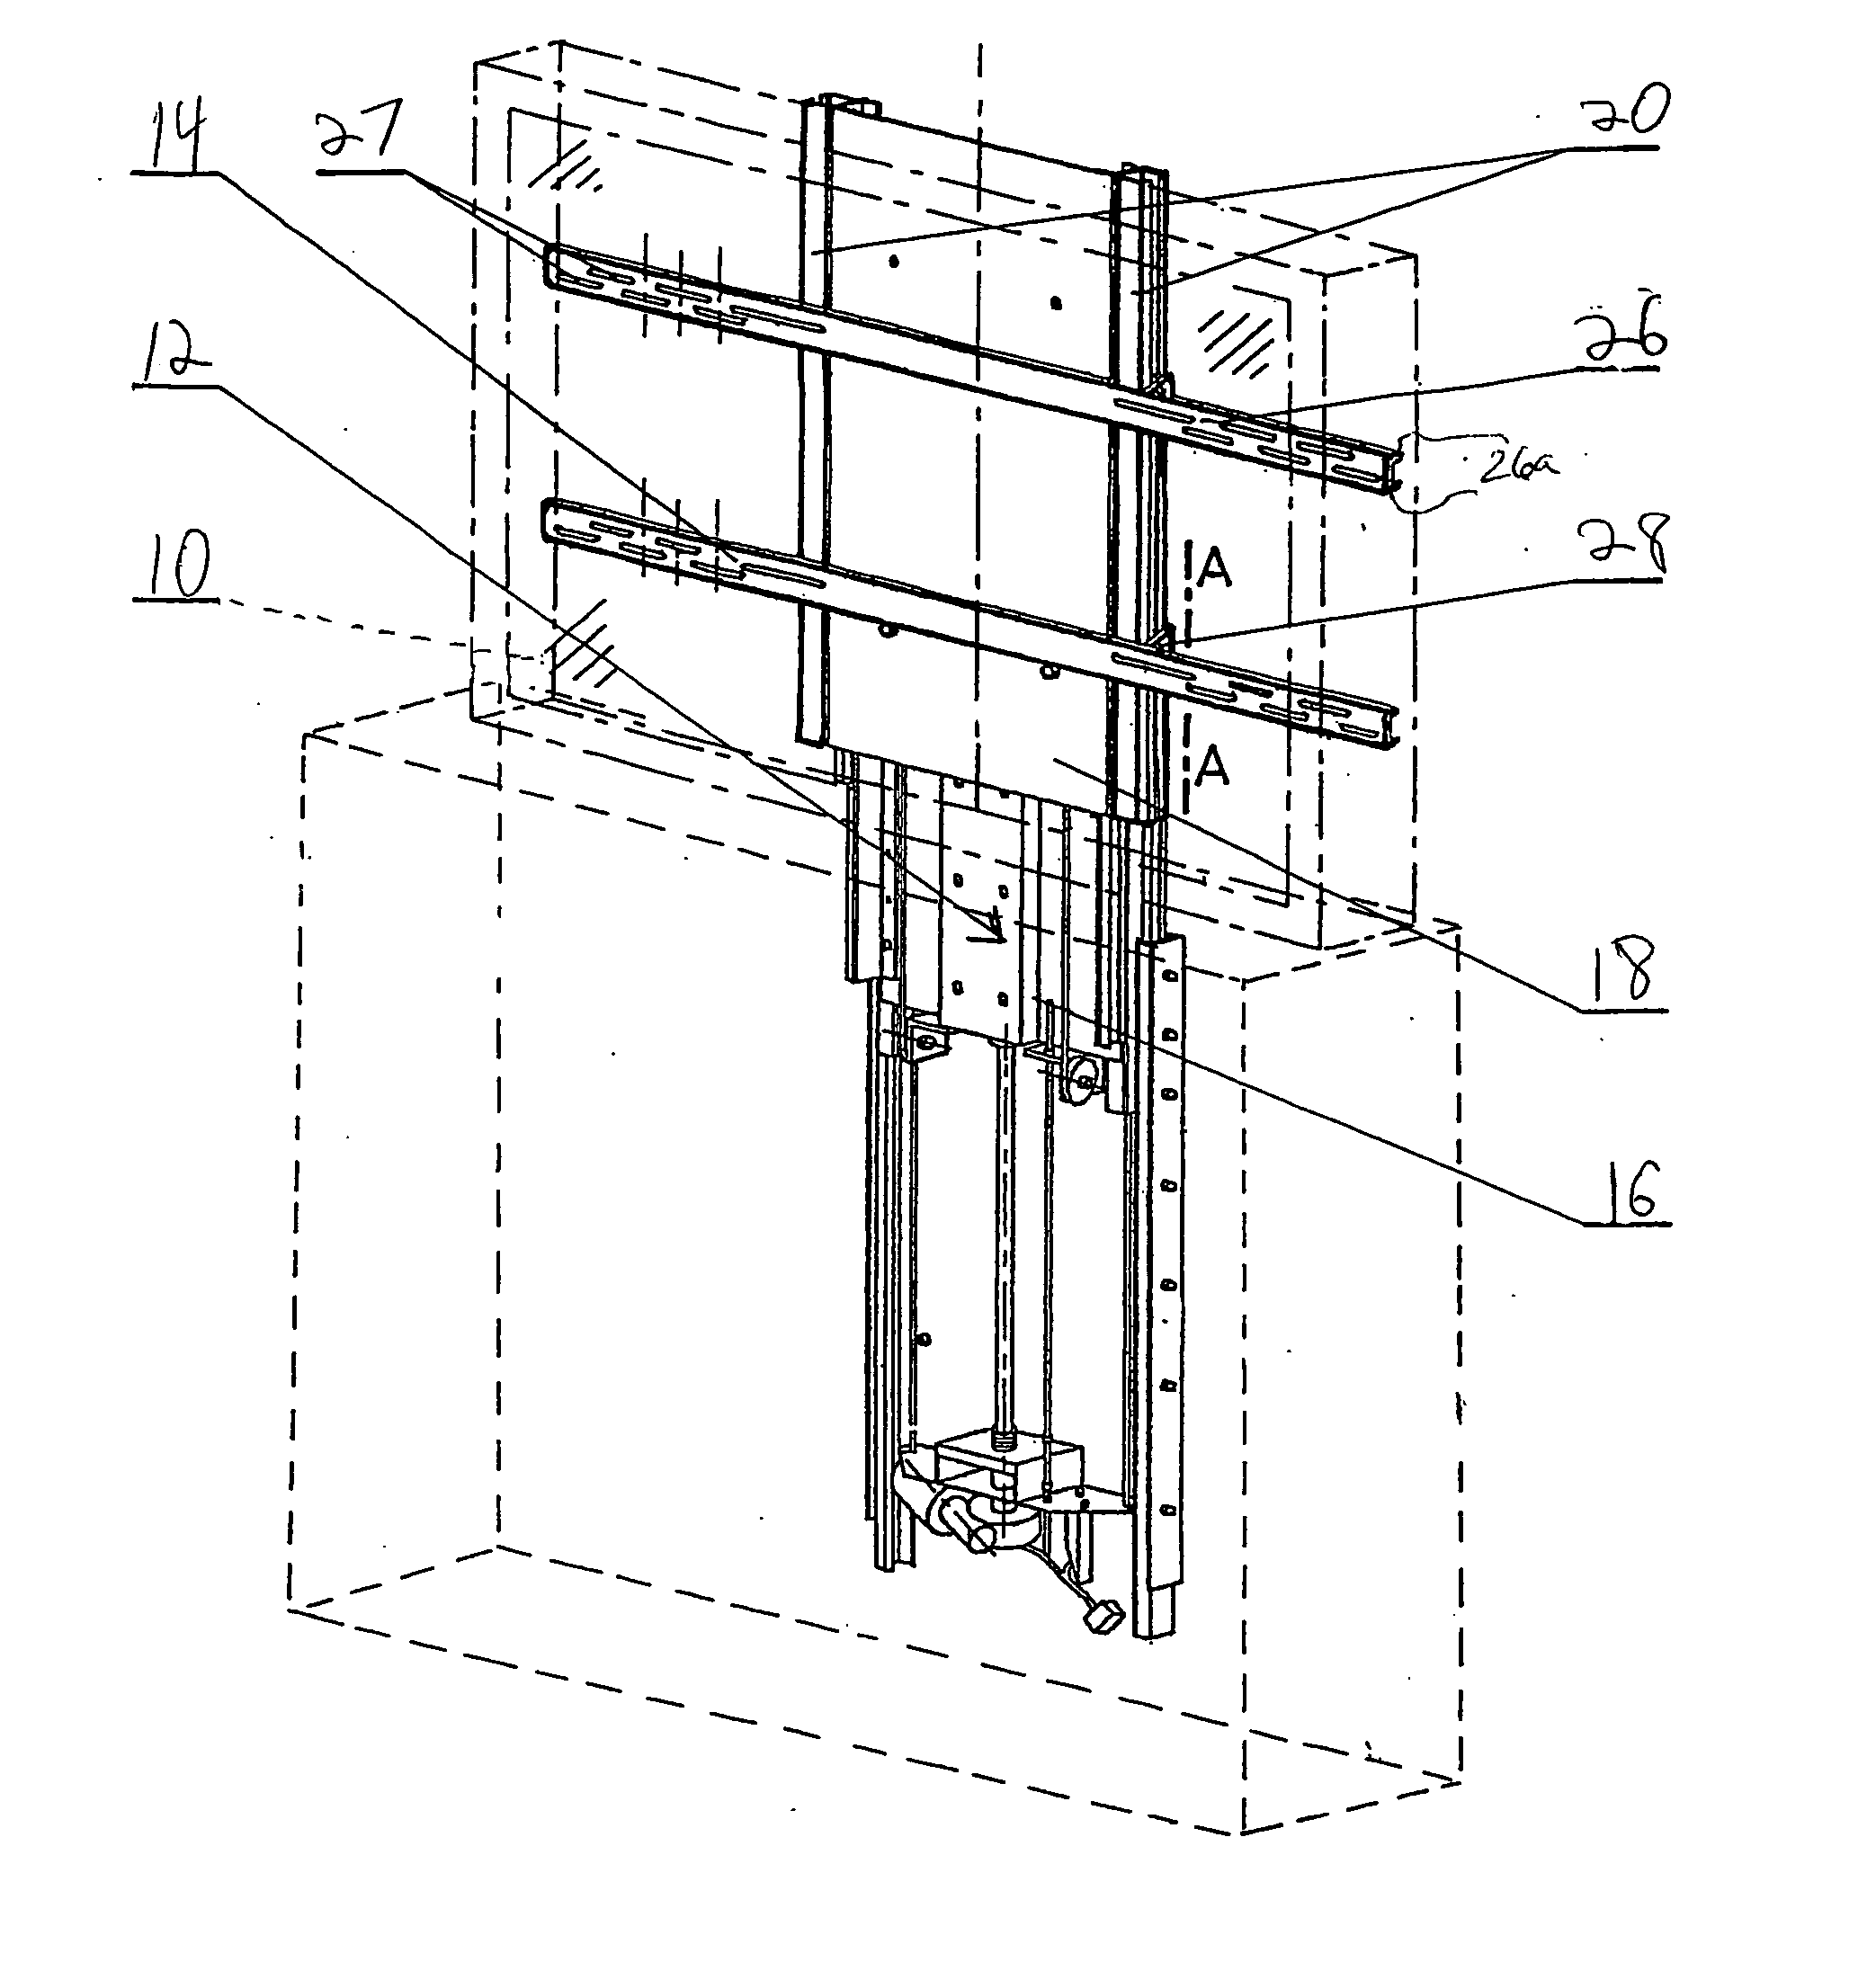 Apparatus for mounting a flat screen display device to a lift mechanism